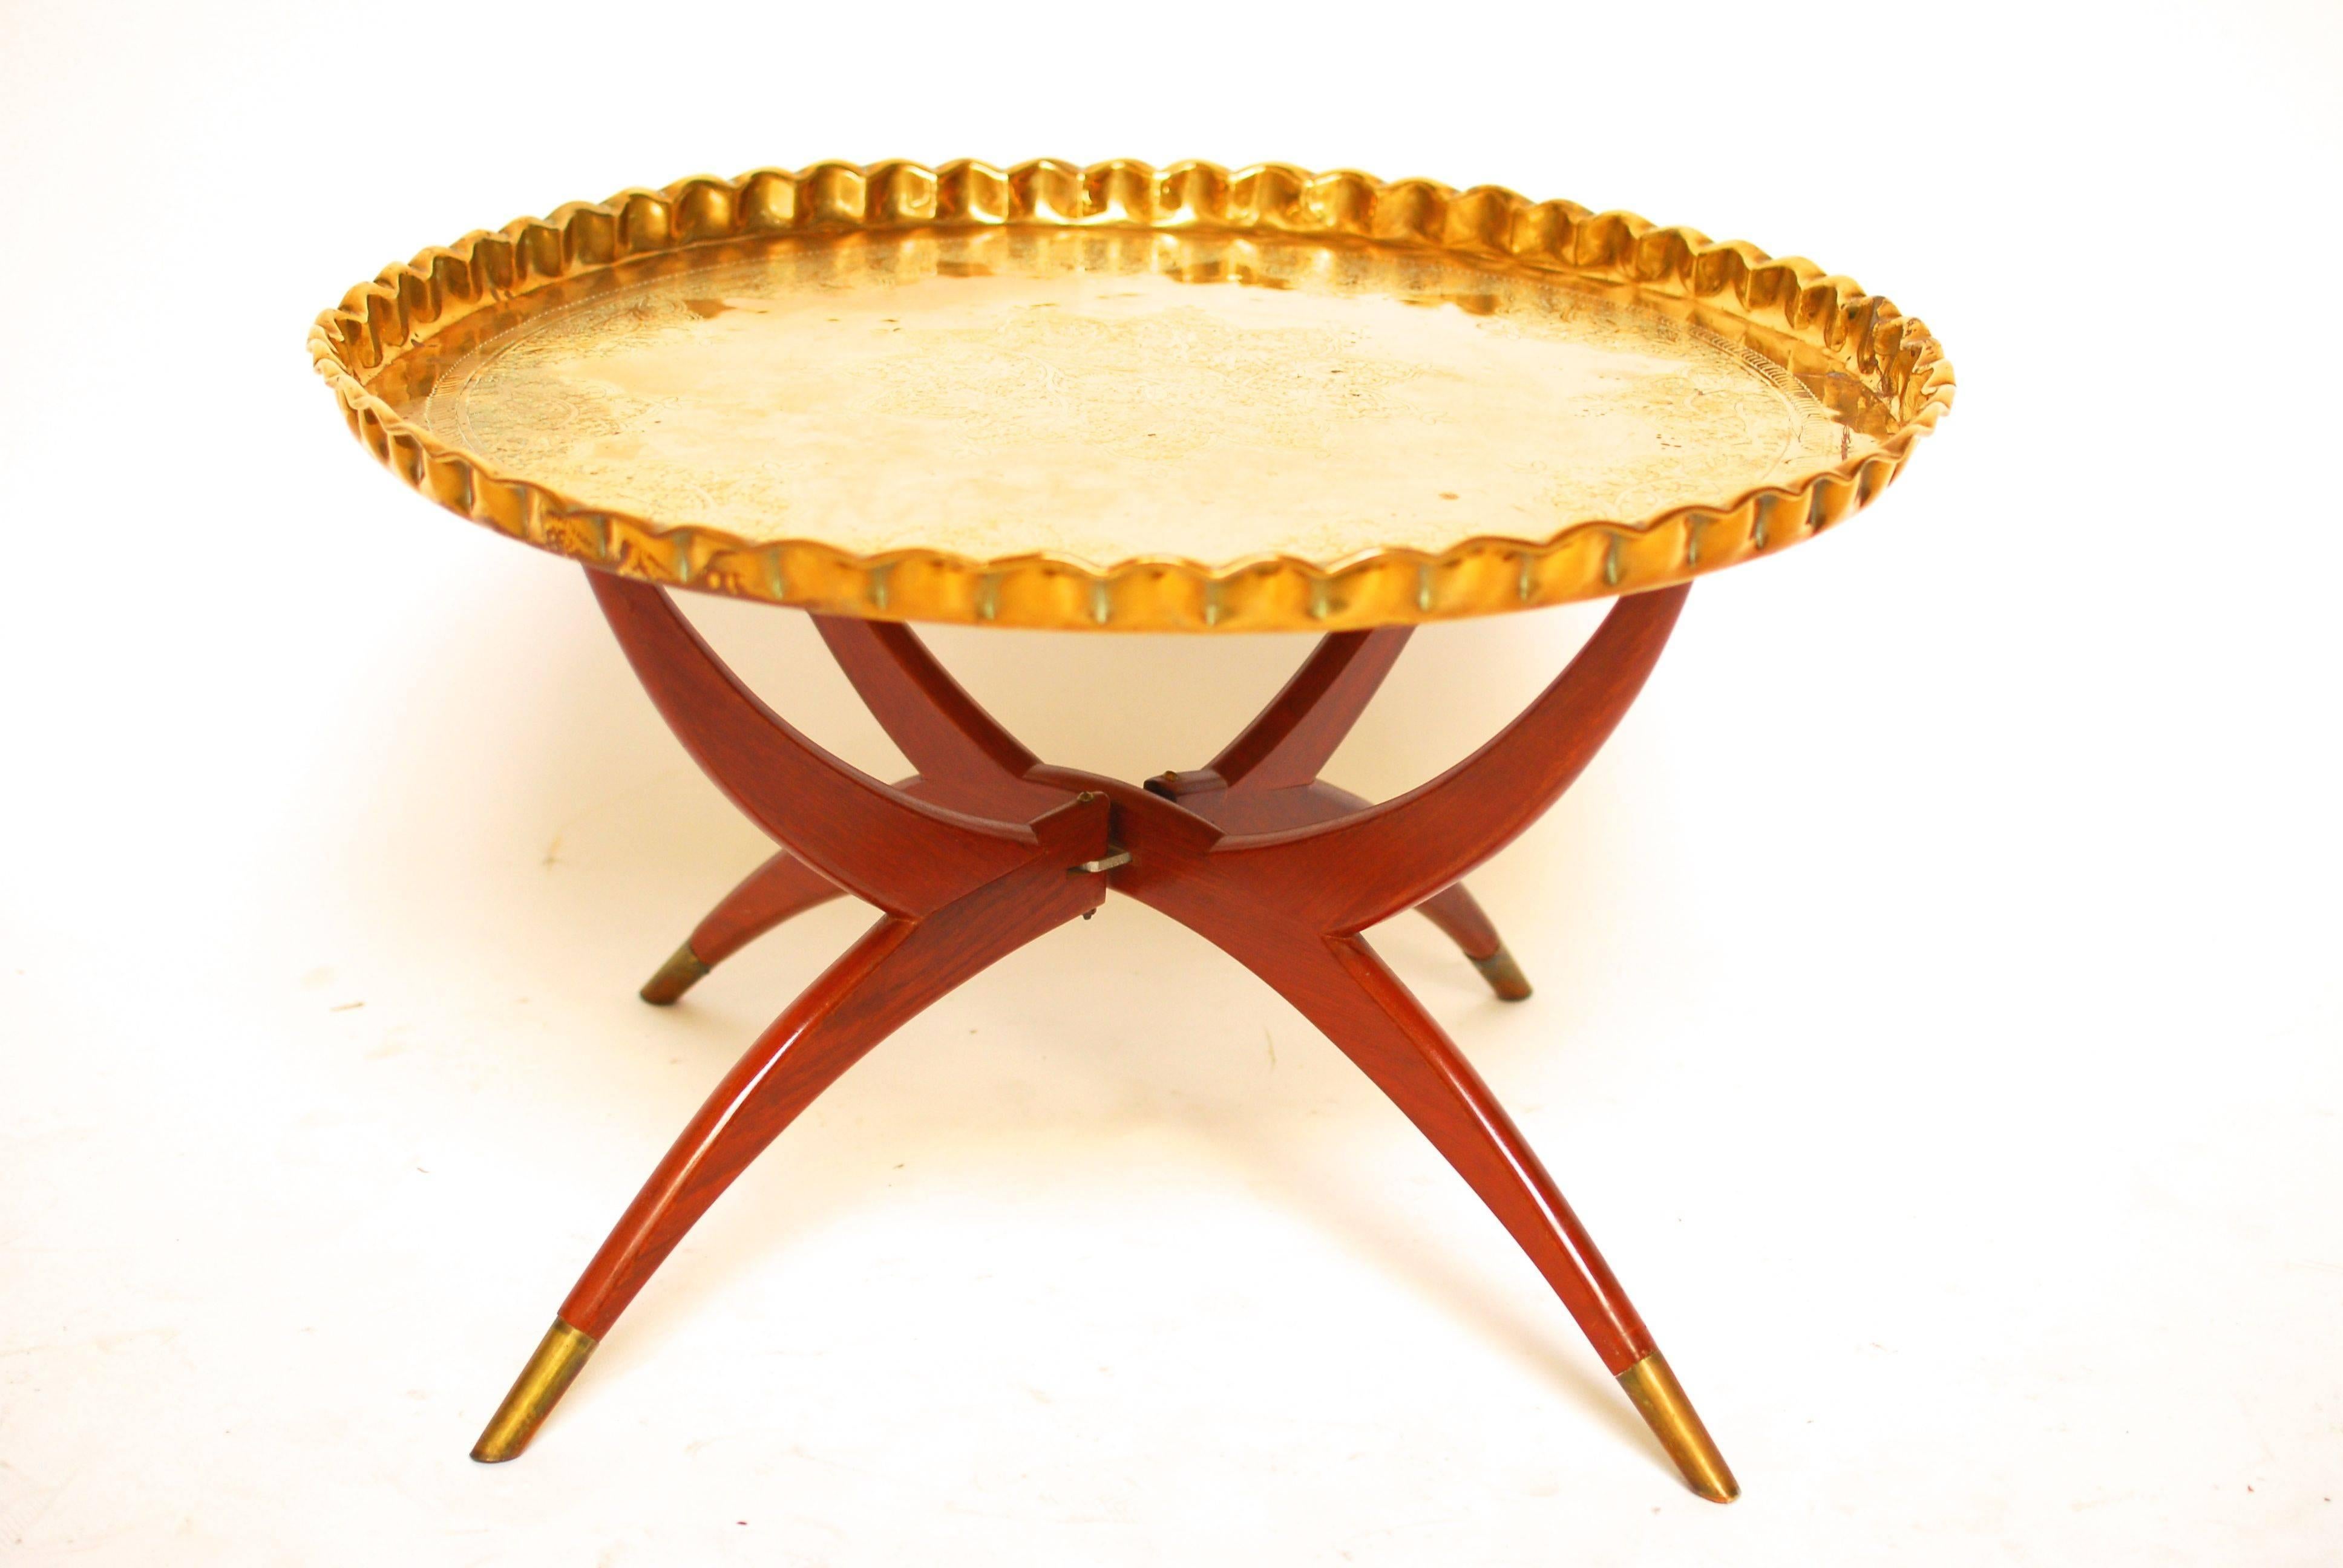 Vintage Middle Eastern engraved brass tray table with mahogany folding Stand and brass feet. The tray is polished and finely carved with foliates and geometric designs. Persian and Moorish style influence the elegance and beauty of this MCM looking